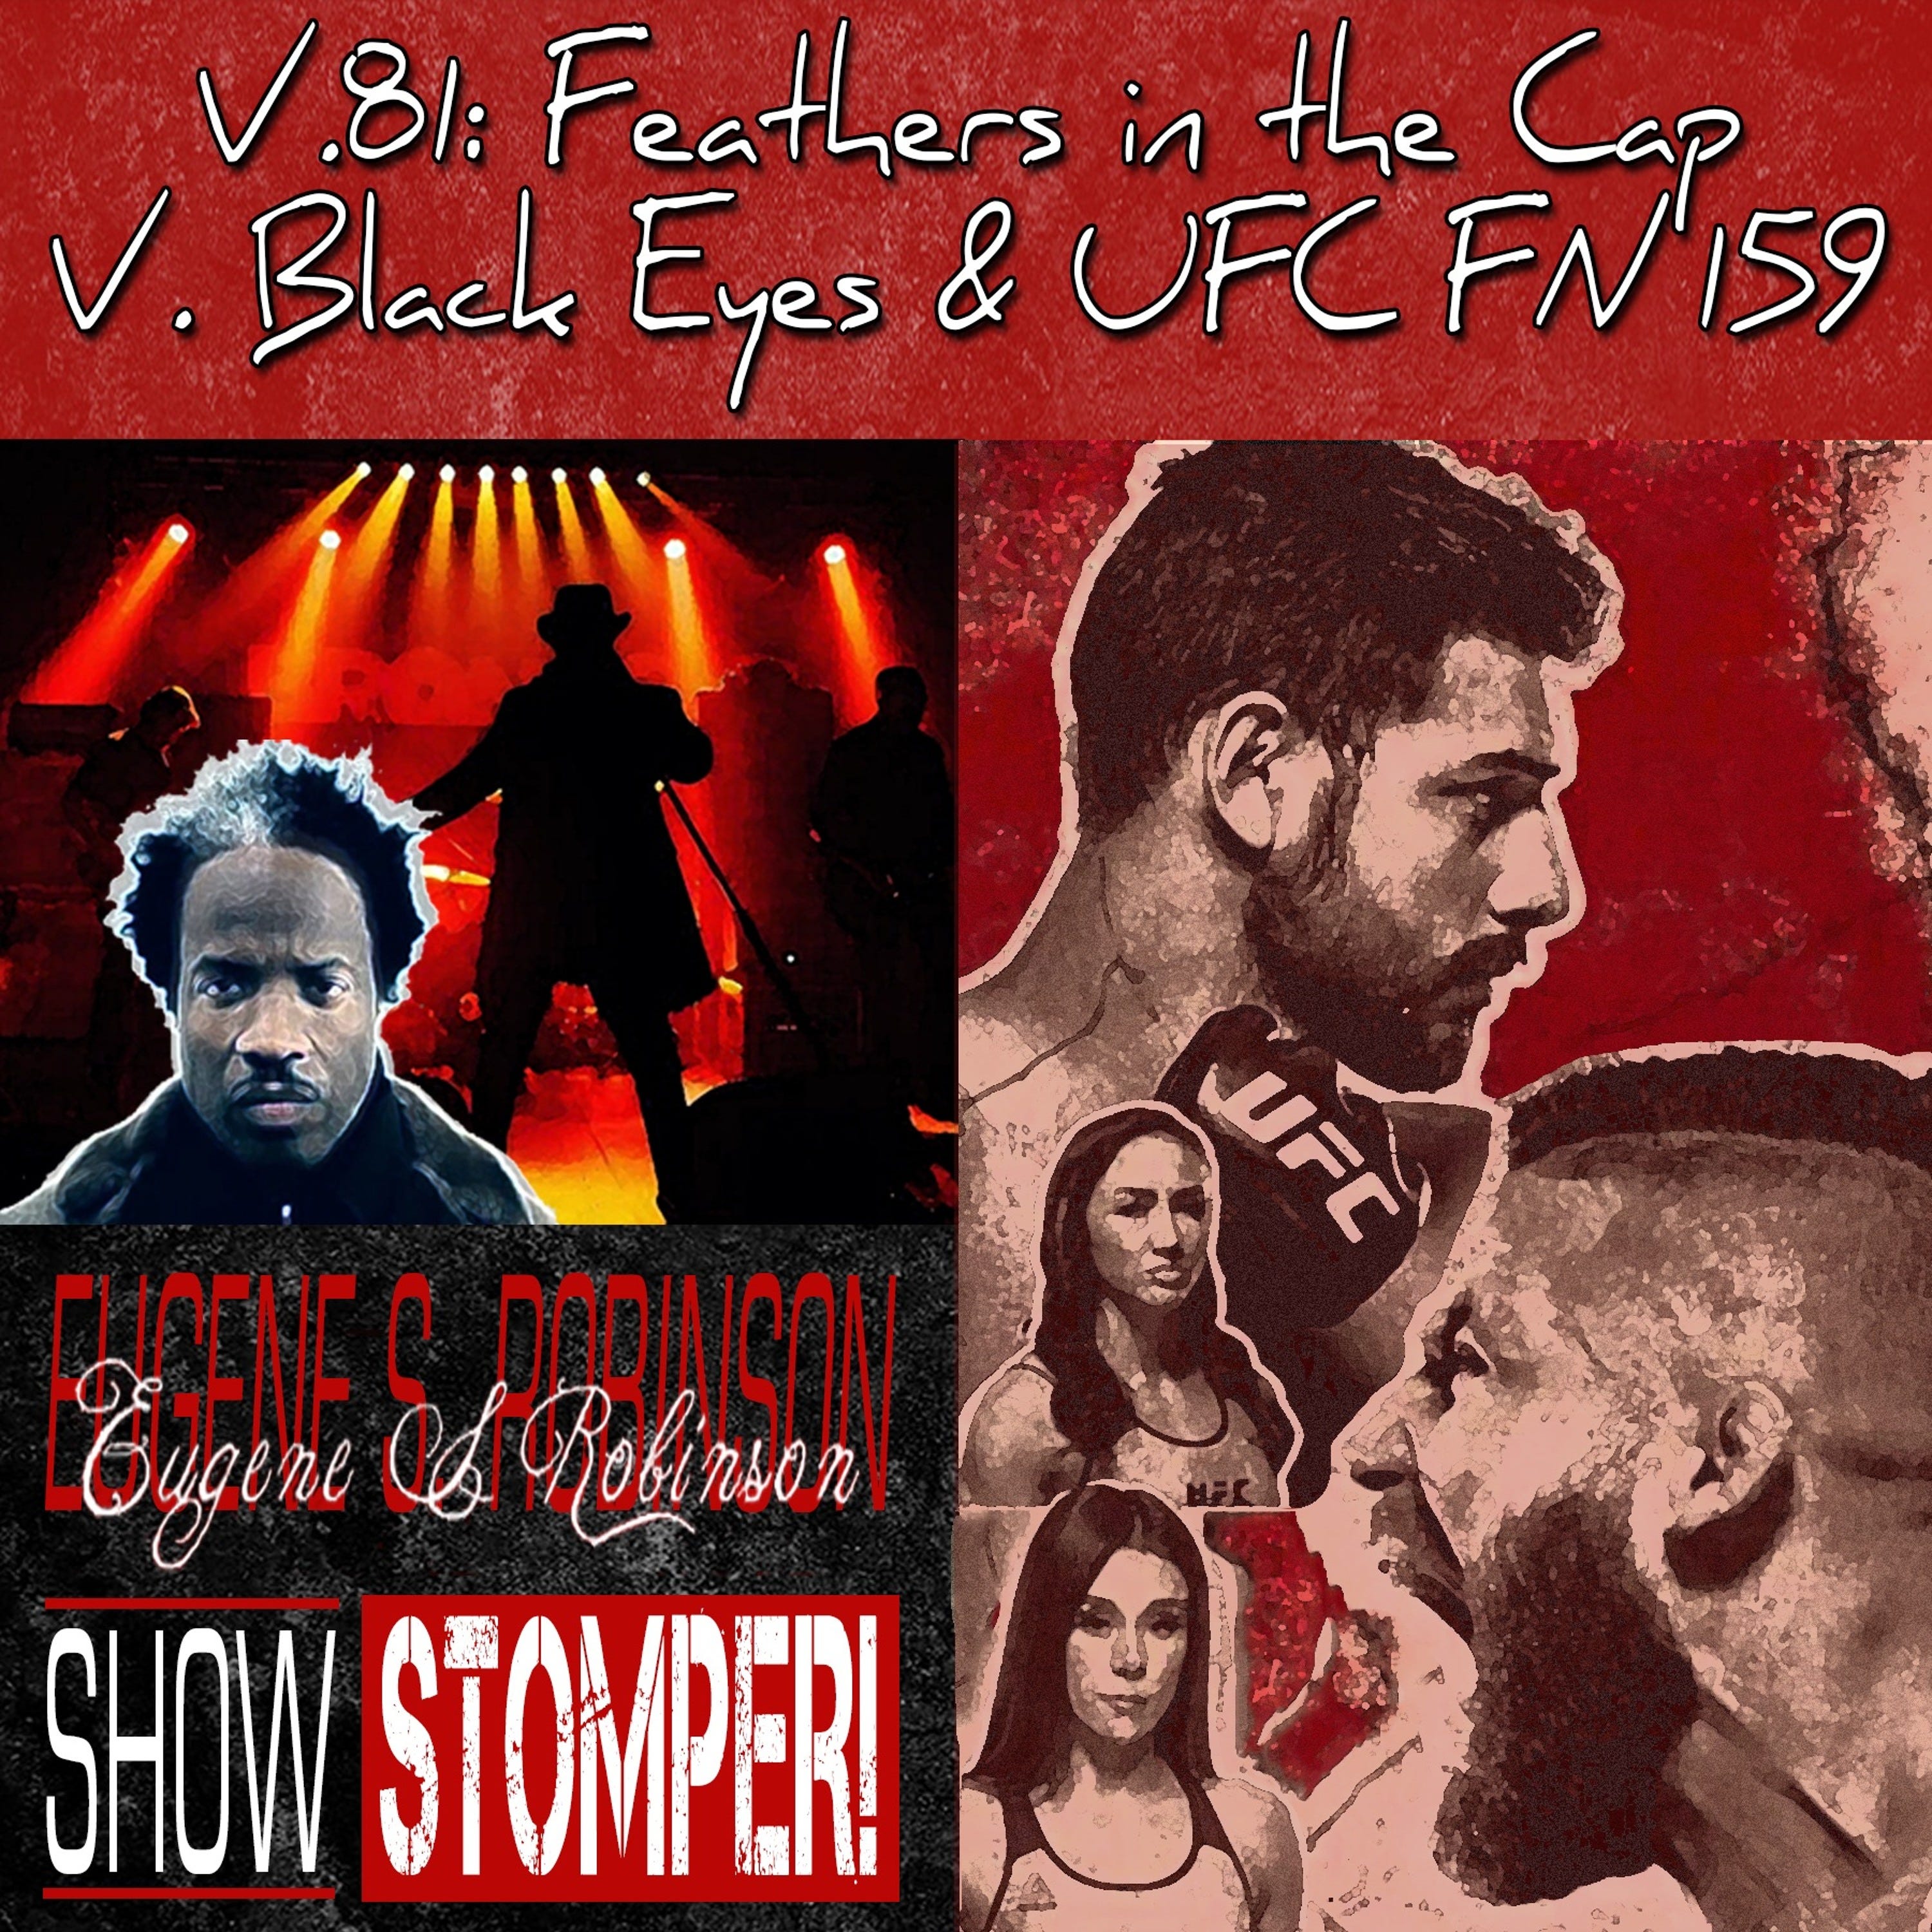 V.81 Feathers In The Cap V. Black Eyes + UFC FN 159 On The Eugene S. Robinson Show Stomper!